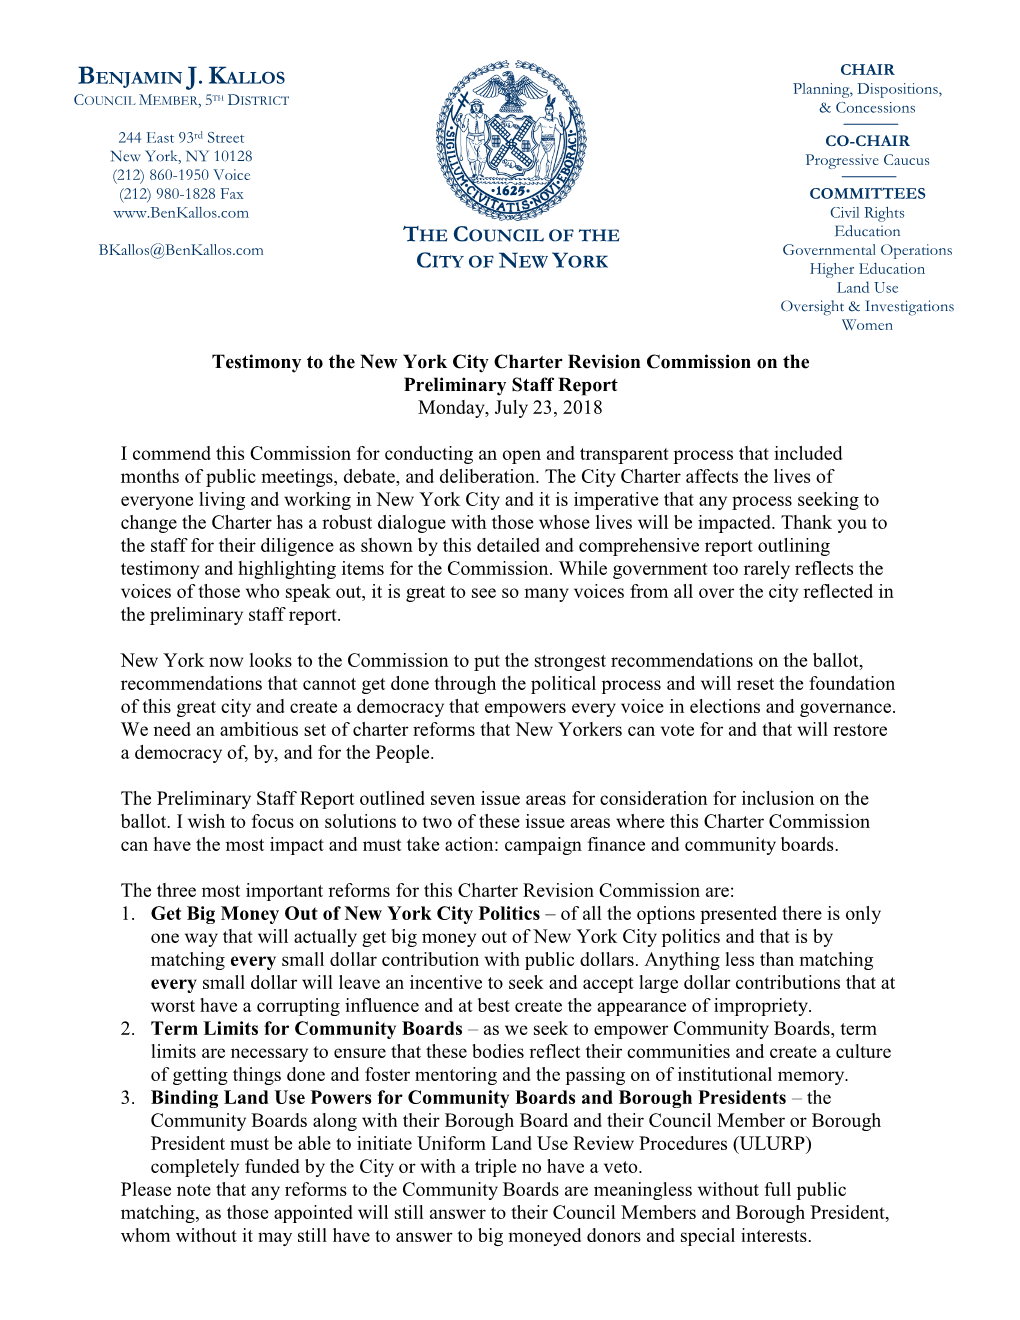 Testimony to the New York City Charter Revision Commission on the Preliminary Staff Report Monday, July 23, 2018